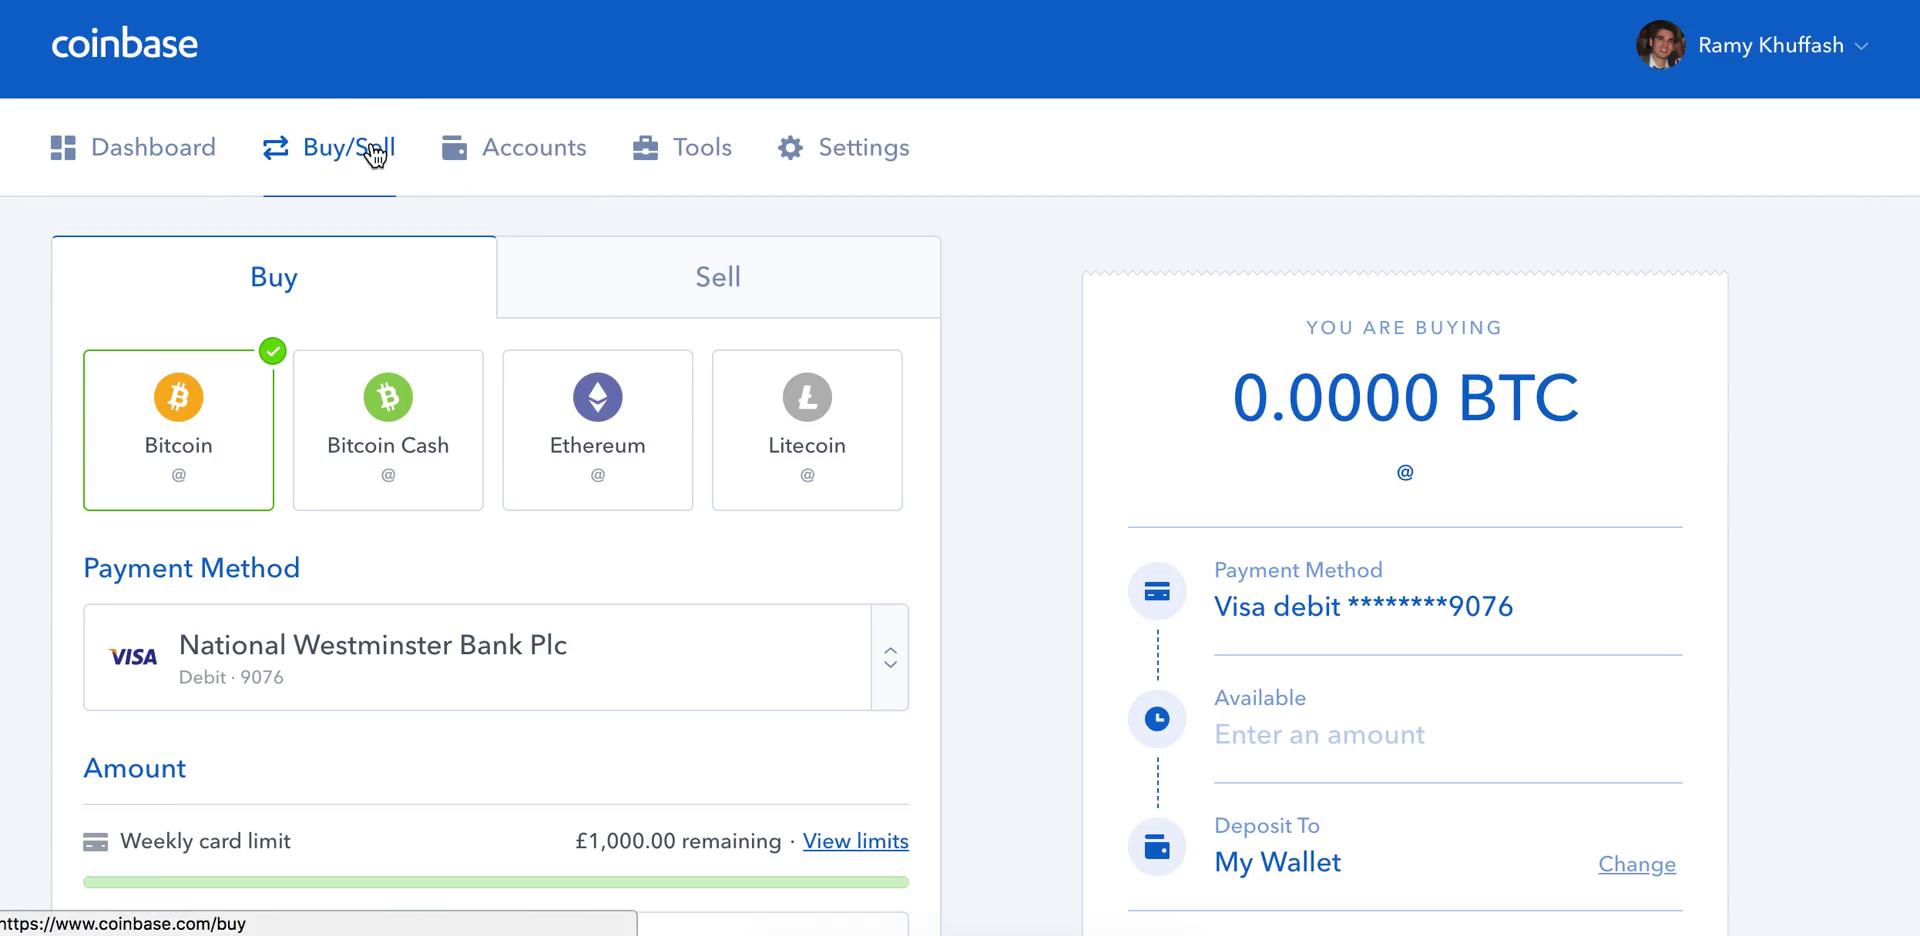 what crypto can i buy on coinbase